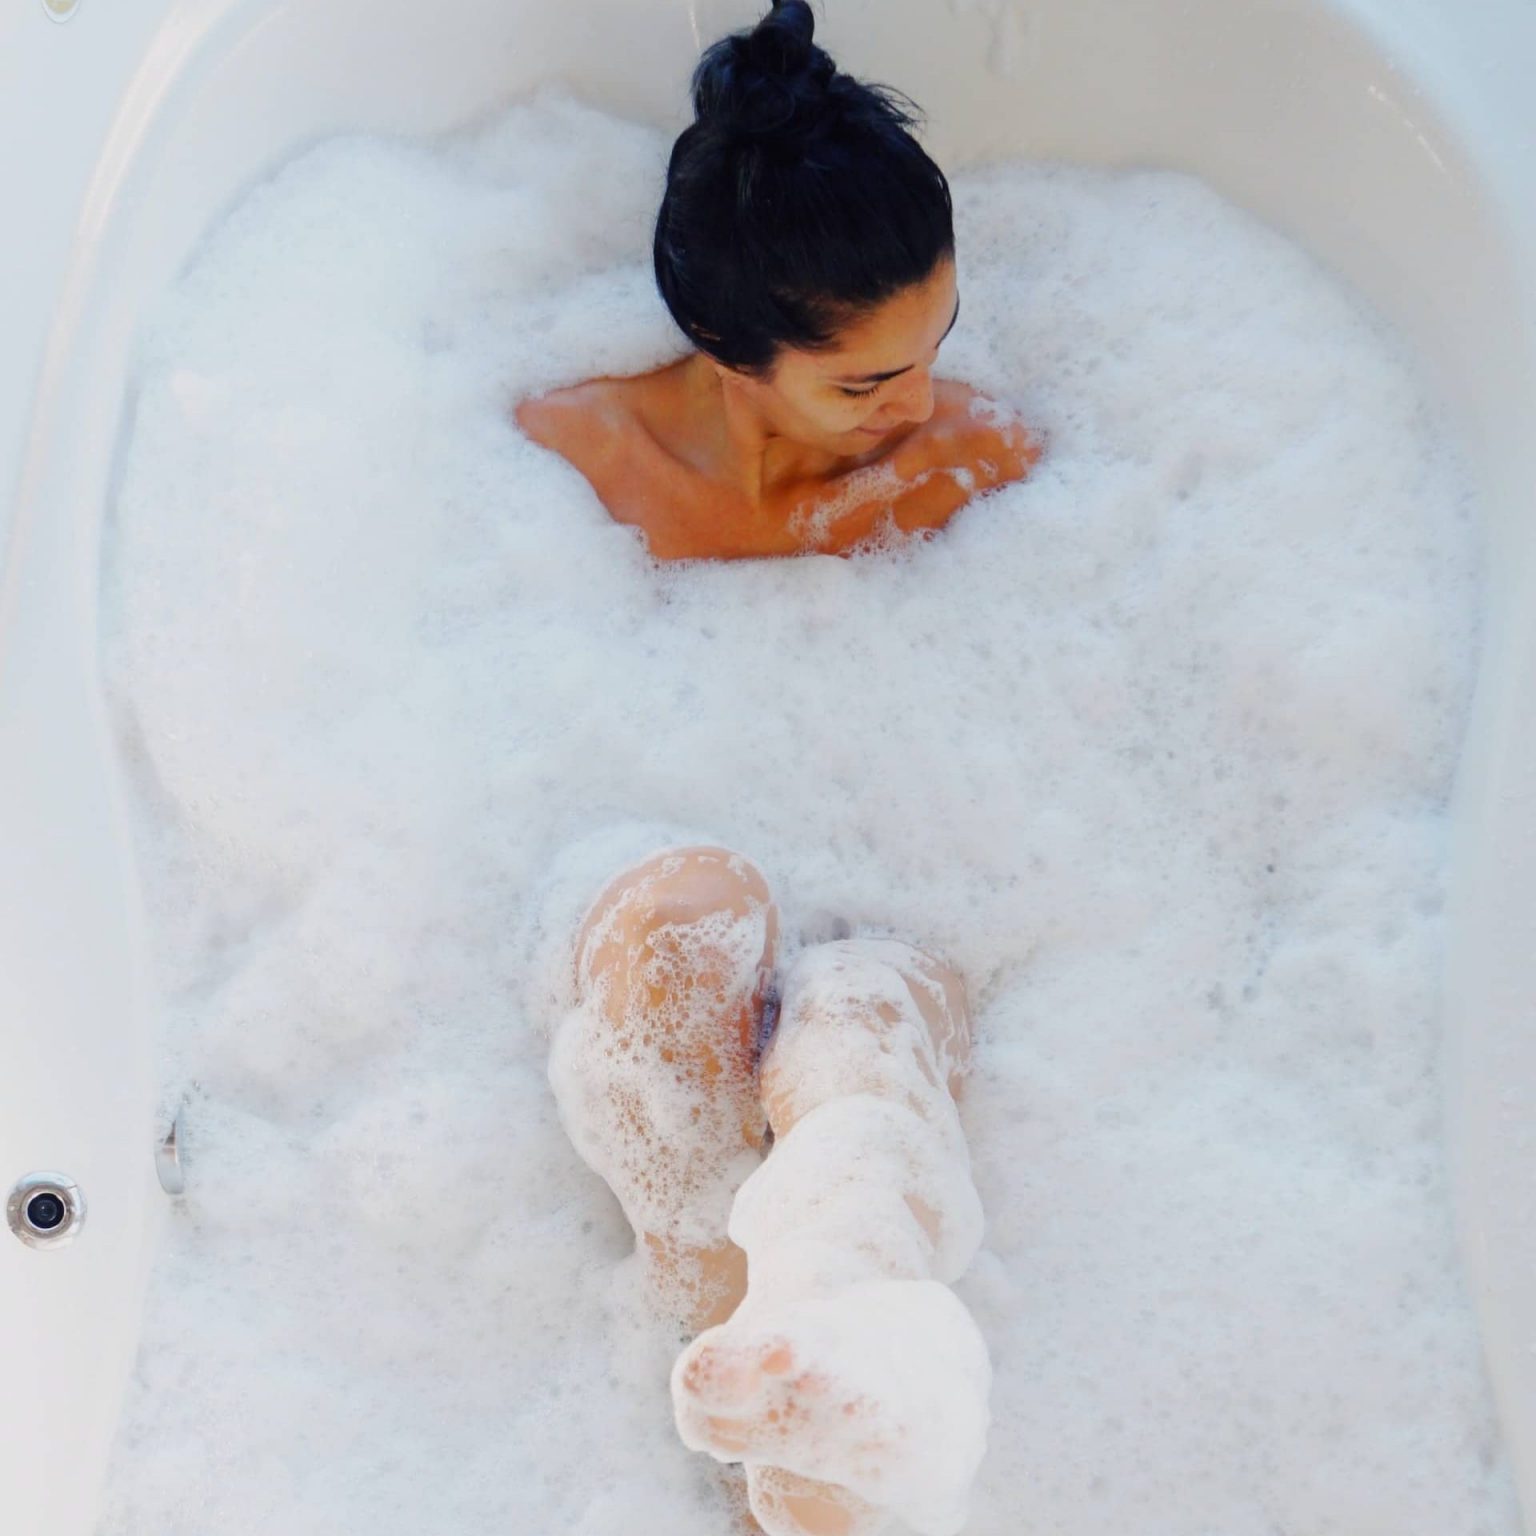 How To De-Stress With Relaxing Baths As A Highly Sensitive Person